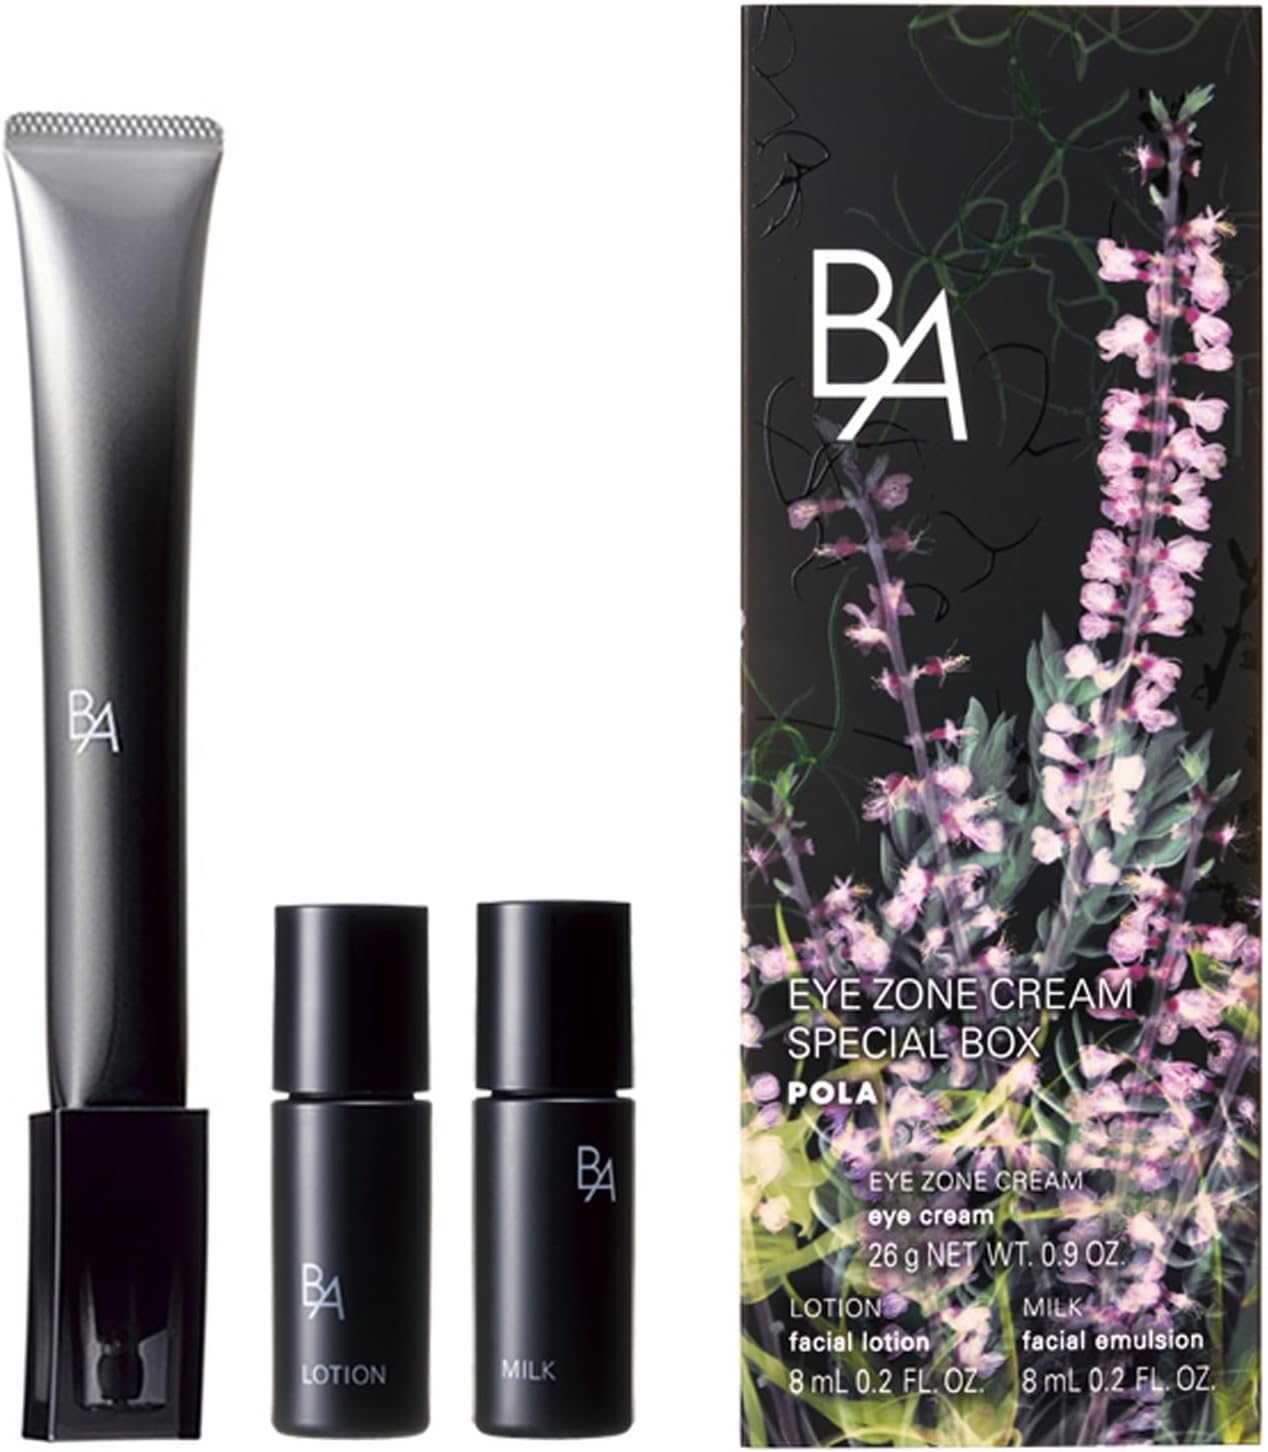 Japanese B.A (Bio-Active) POLA - Buy Skin Care Product Online from